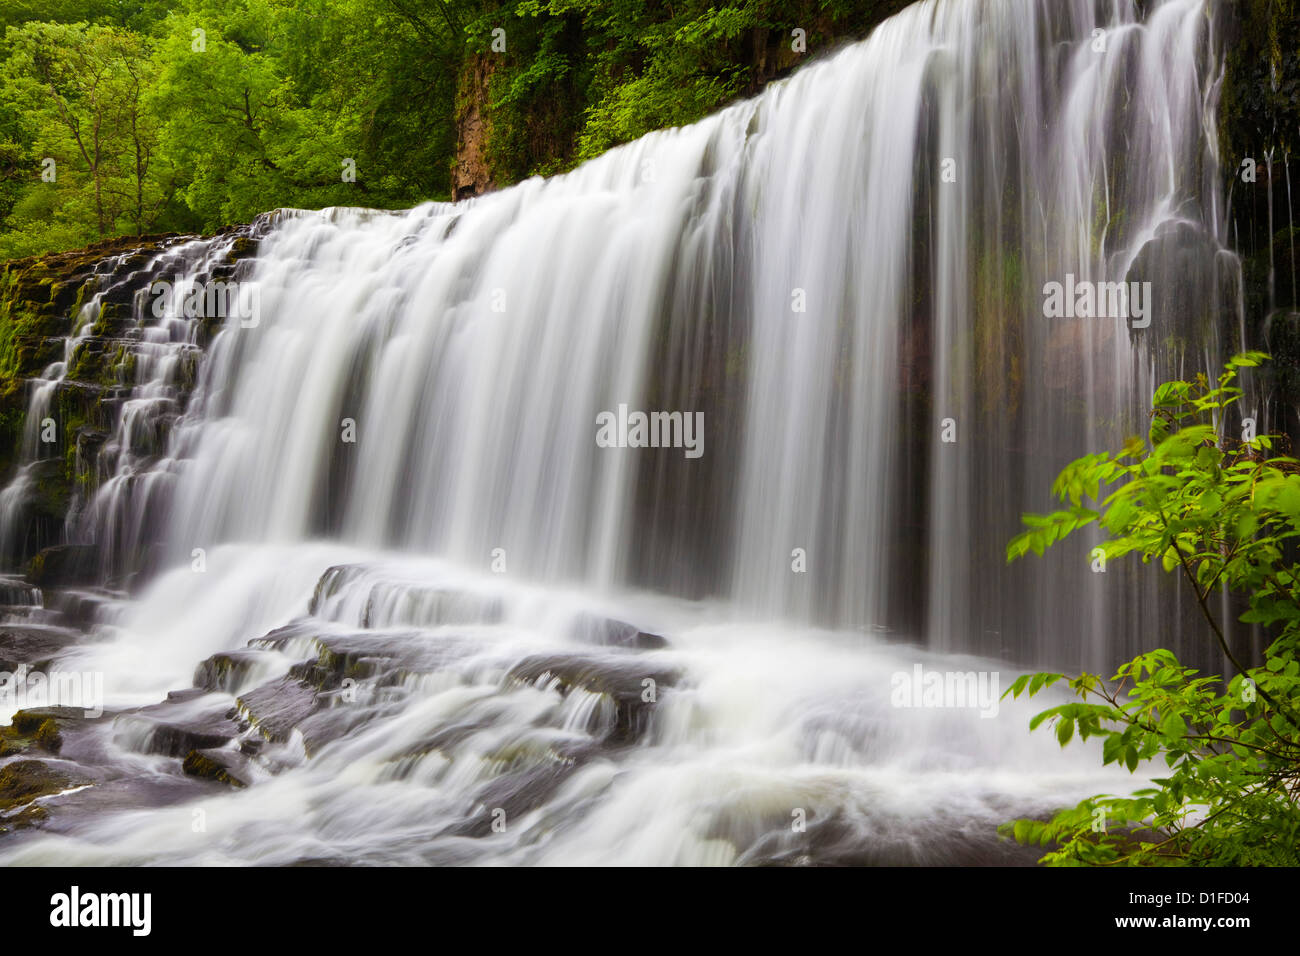 Sgwd Isaf Clun Waterfall, Brecon Beacons, Wales, United Kingdom, Europe Stock Photo